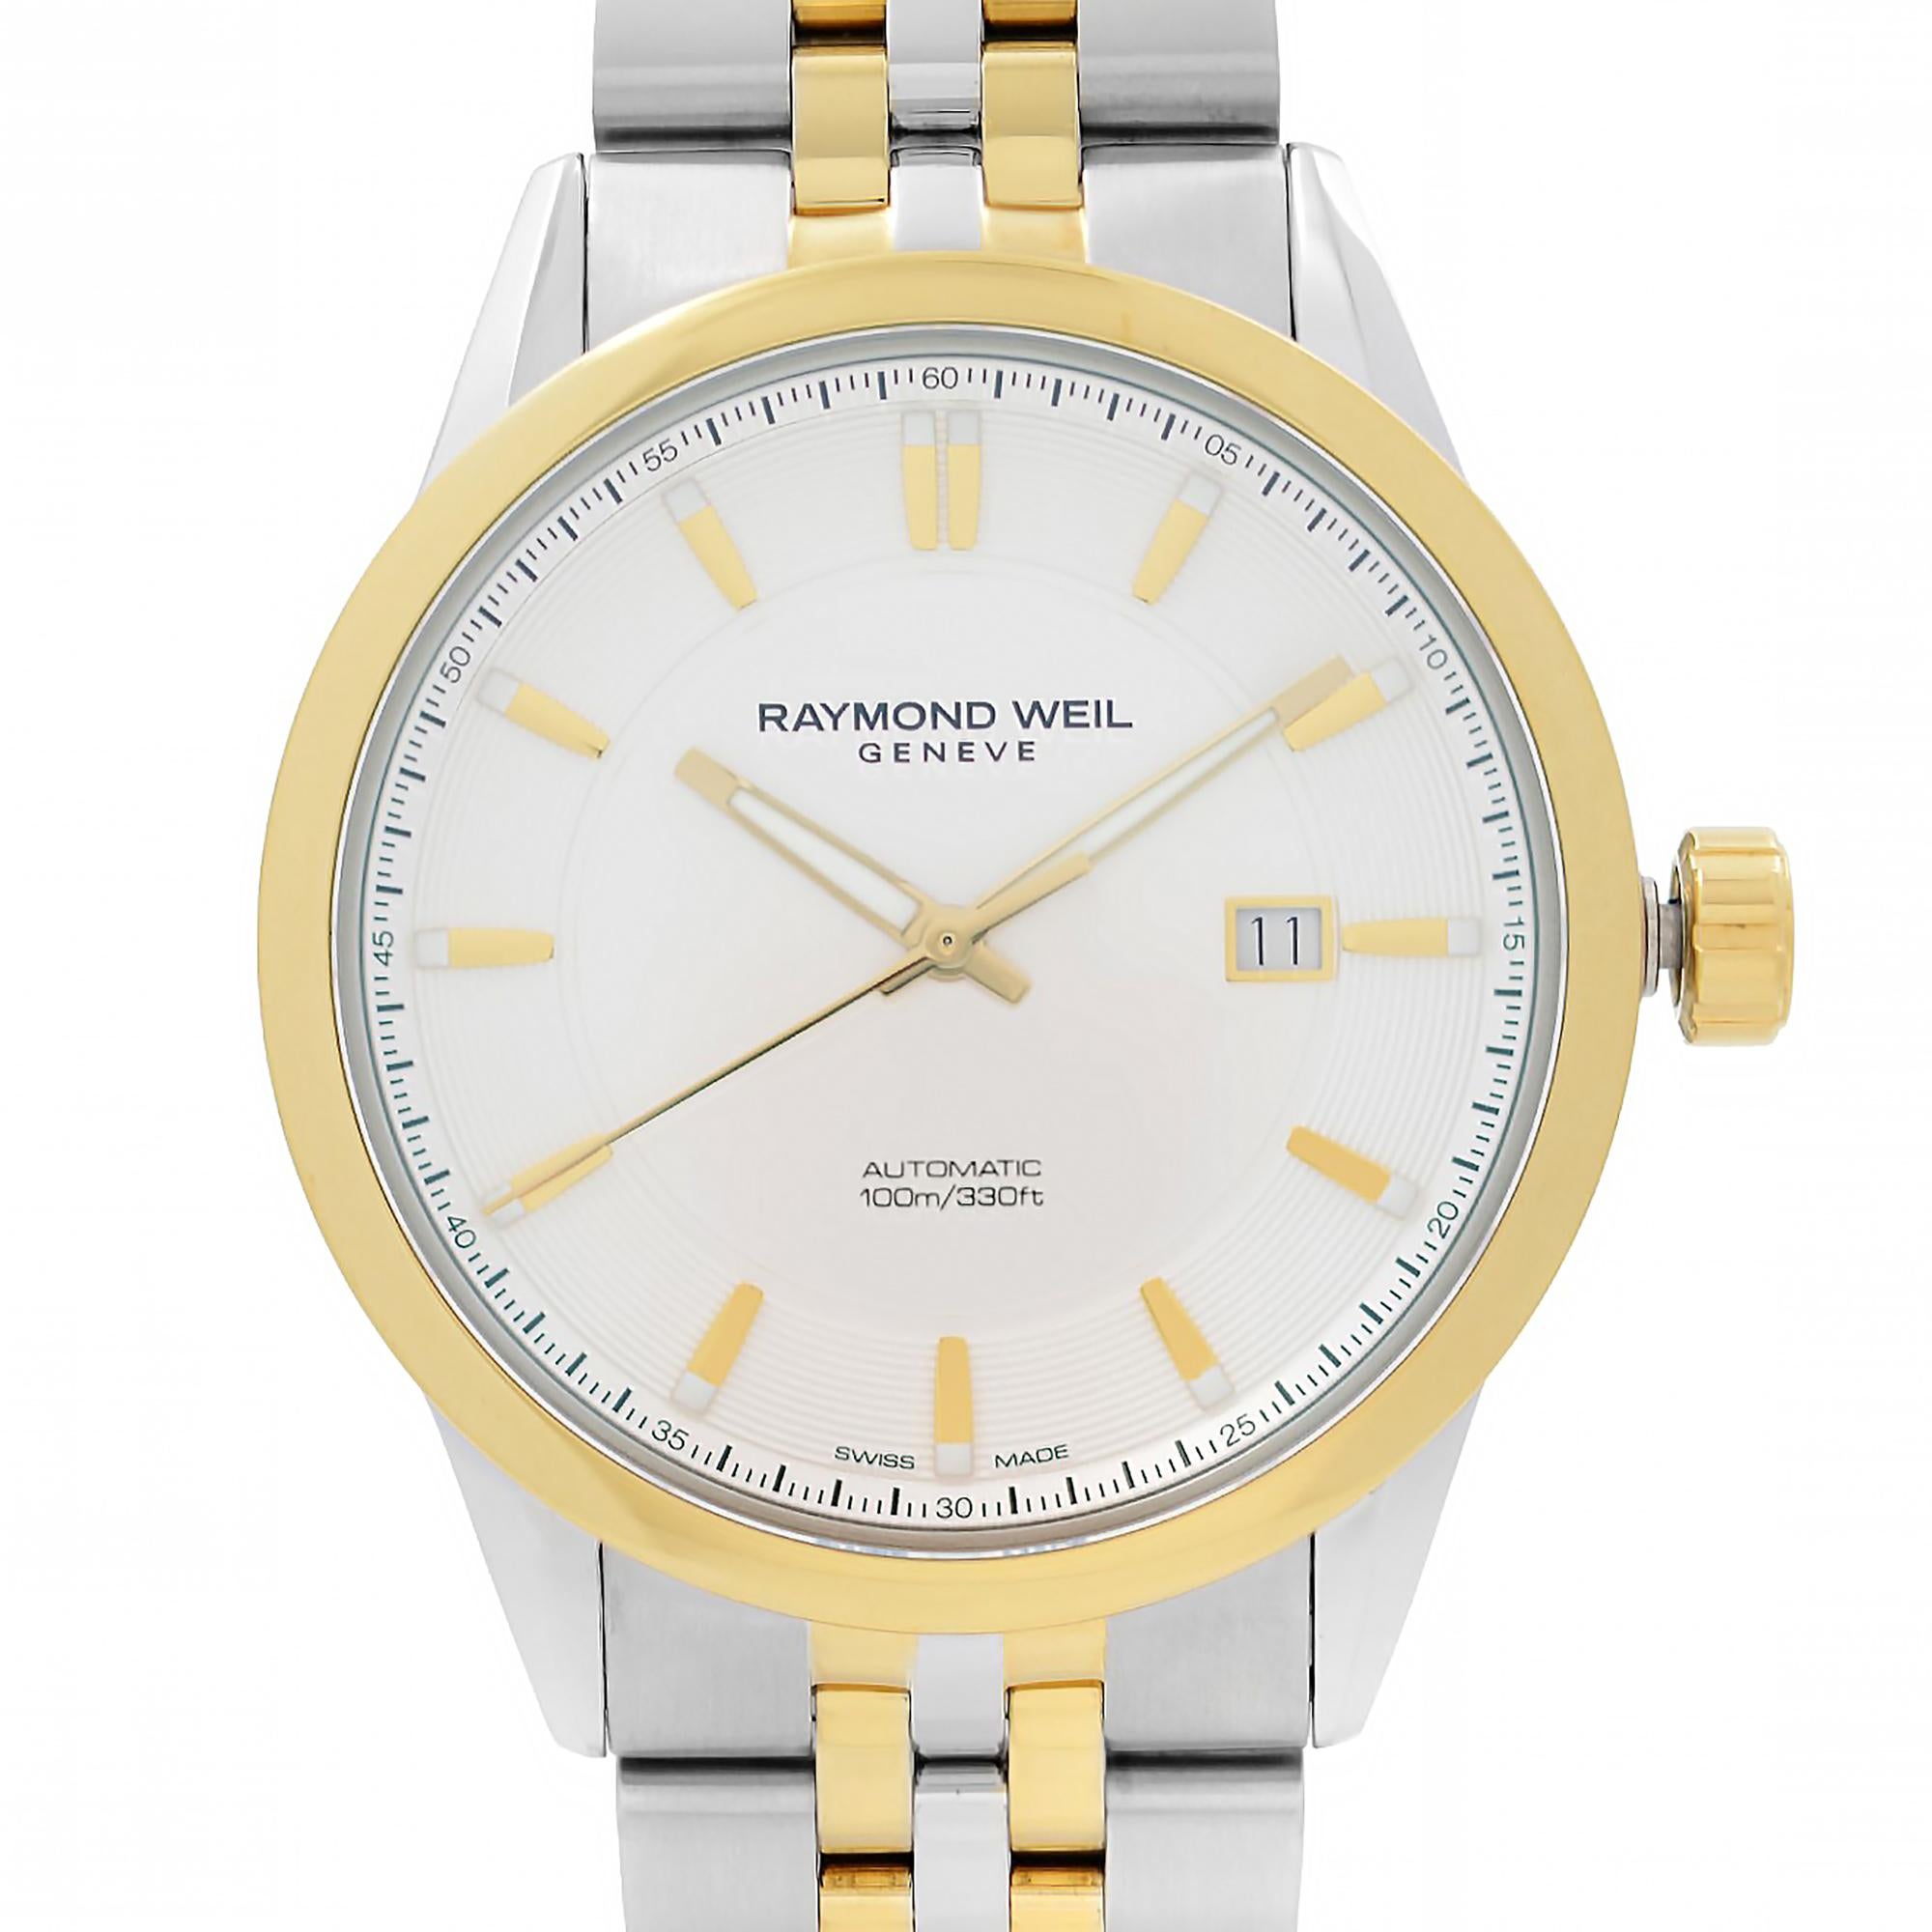 Store Display Model Can Have Minor Blemishes.  Raymond Weil Freelancer 42mm Steel Silver Dial Automatic Watch 2731-STP-65001. This Beautiful Timepiece Features: Stainless Steel Case with a Two-Tone (Silver-Tone and Yellow Gold PVD) Stainless Steel